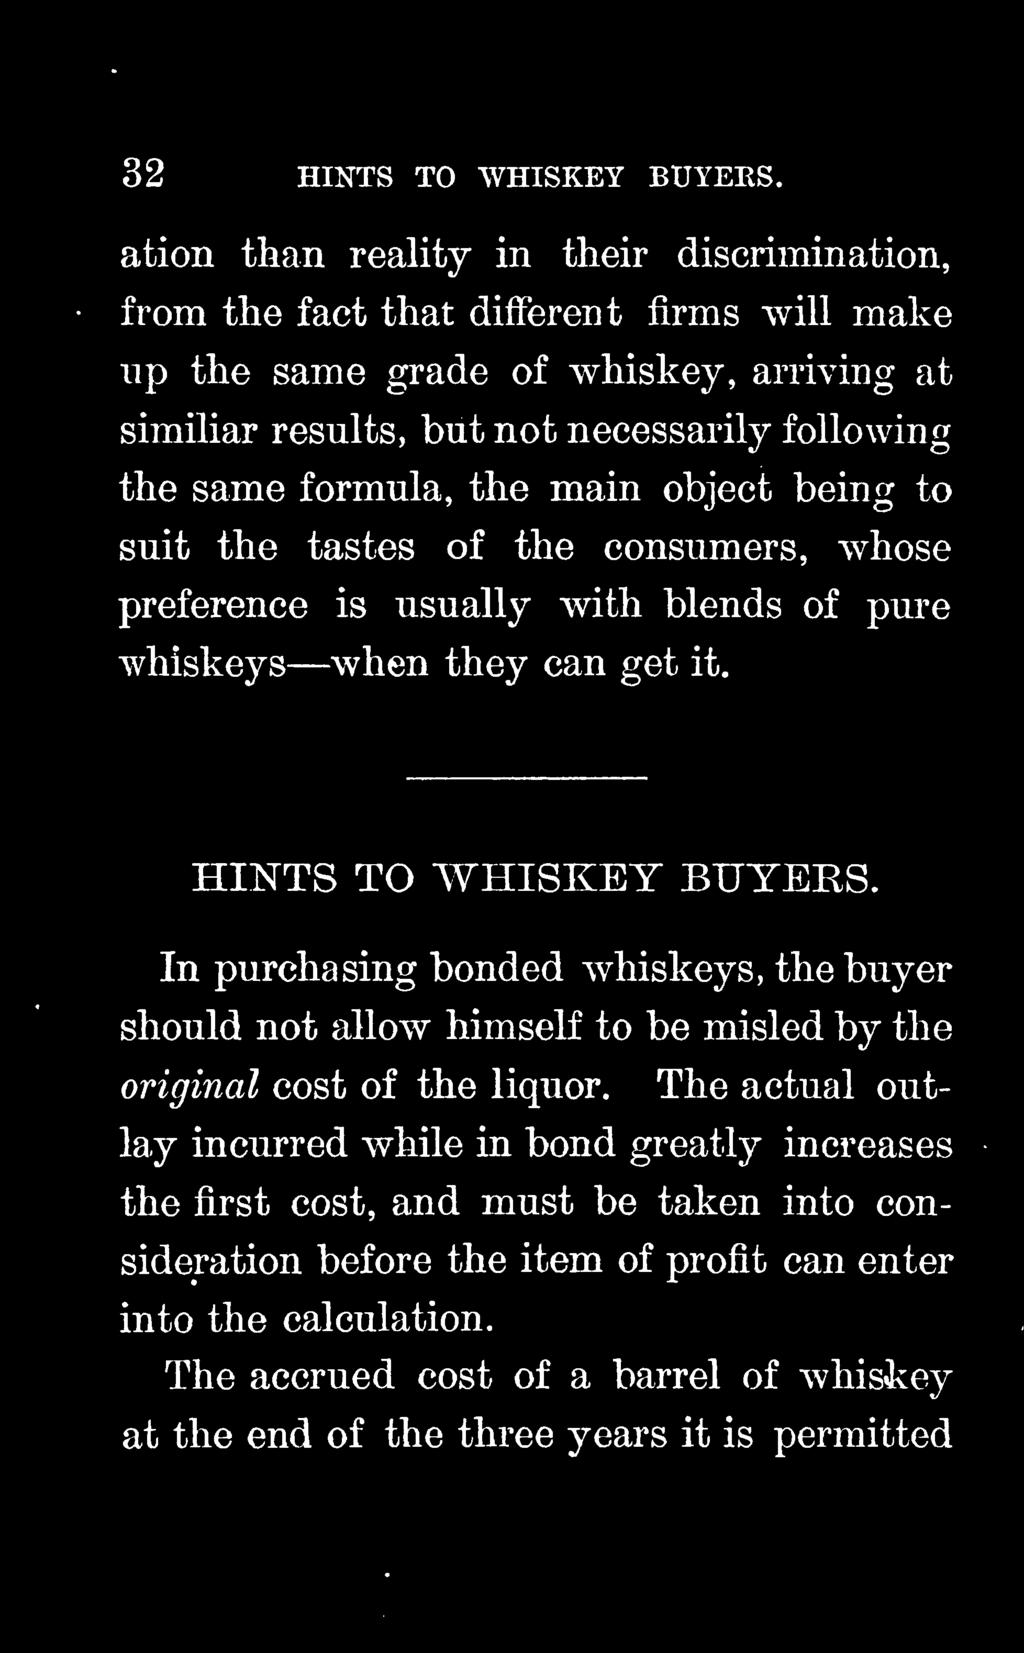 In purchasing bonded whiskeys, the buyer should not allow himself to be misled by the original cost of the liquor.